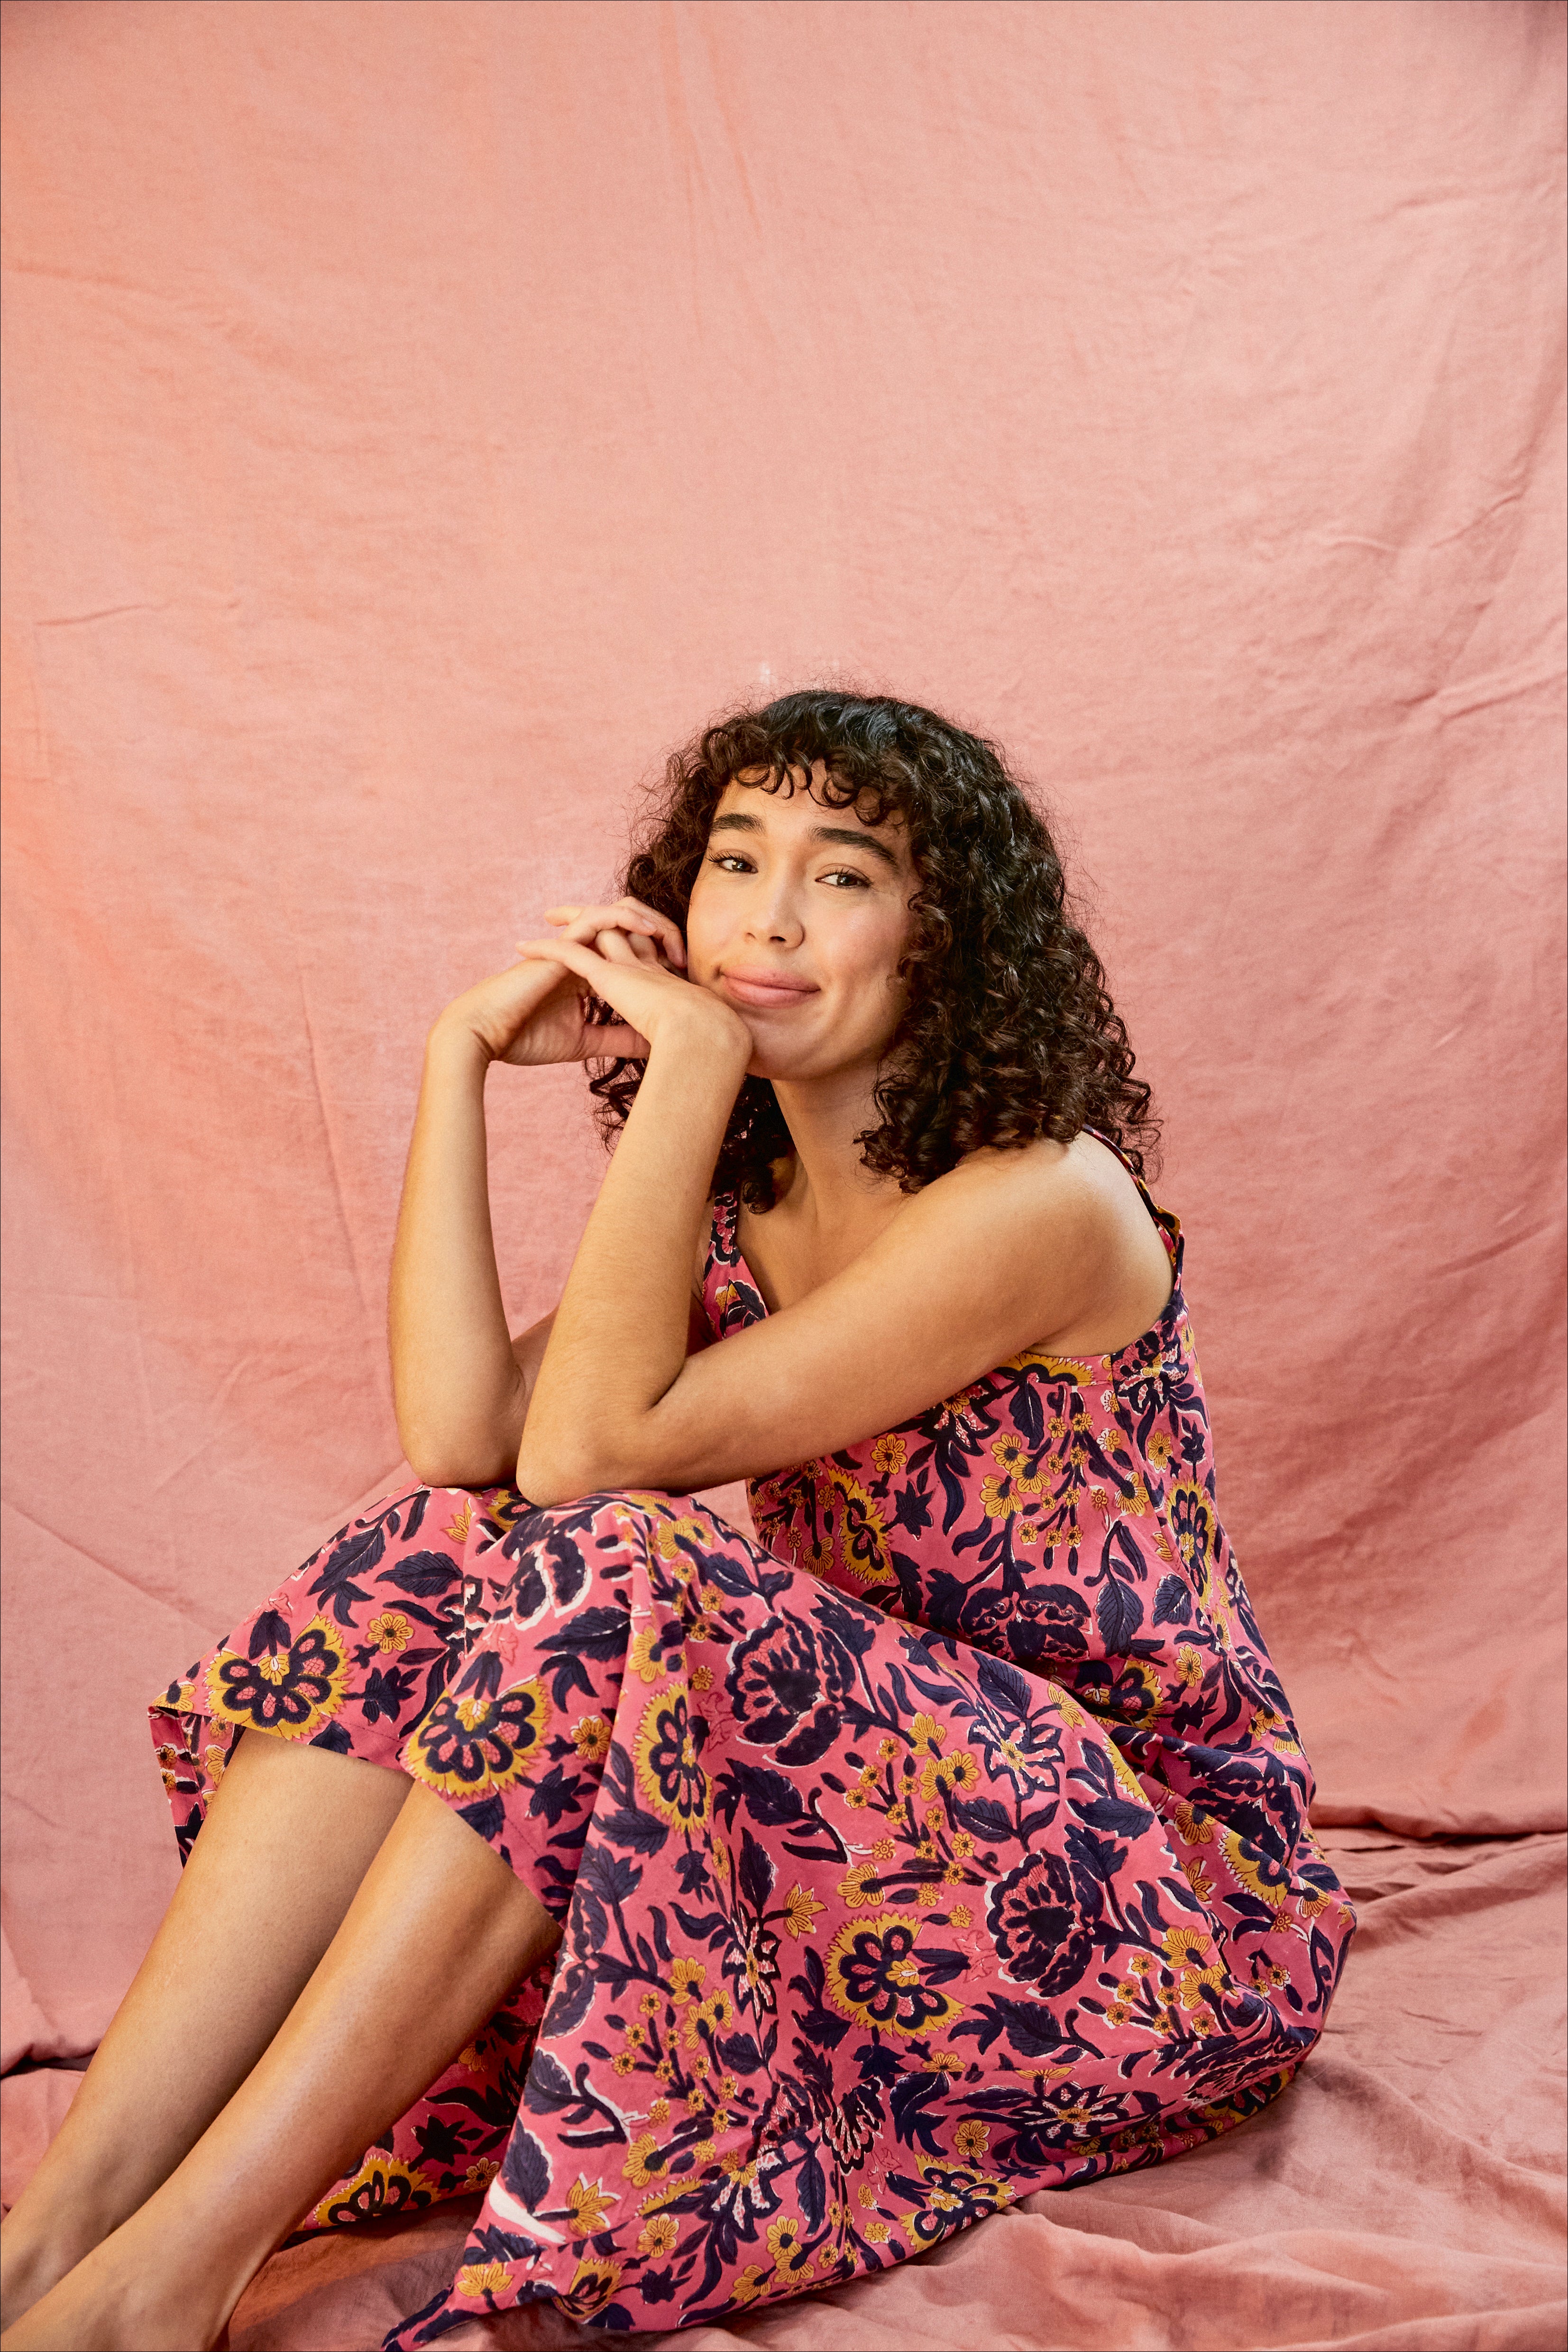 Model wearing the Kate strap dress against a blush background, model is sitting down